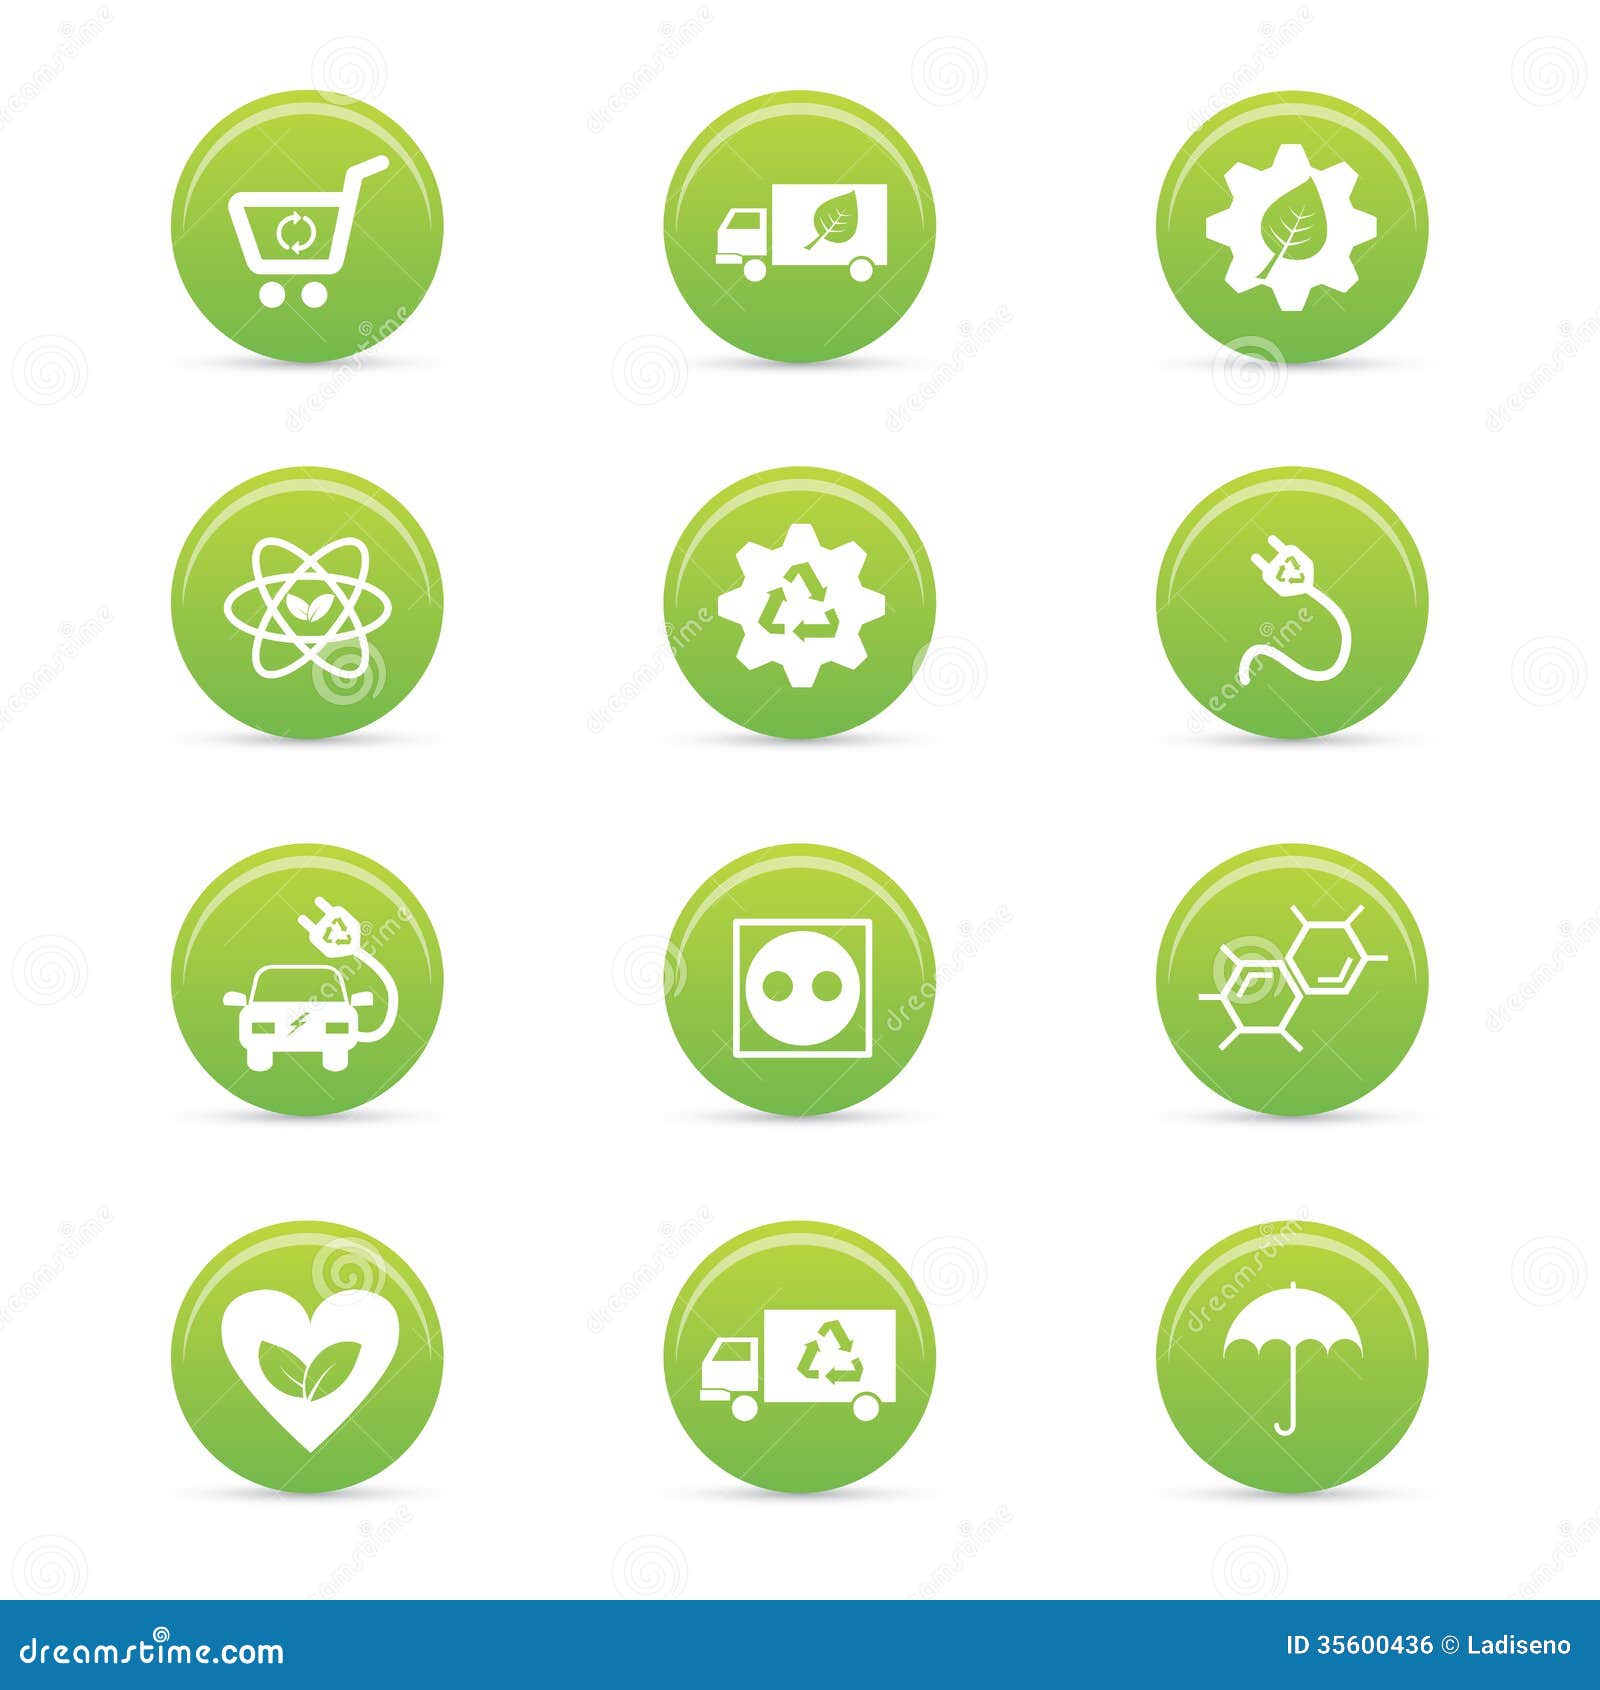 sustainability-icons-abstract-white-background-35600436.jpg